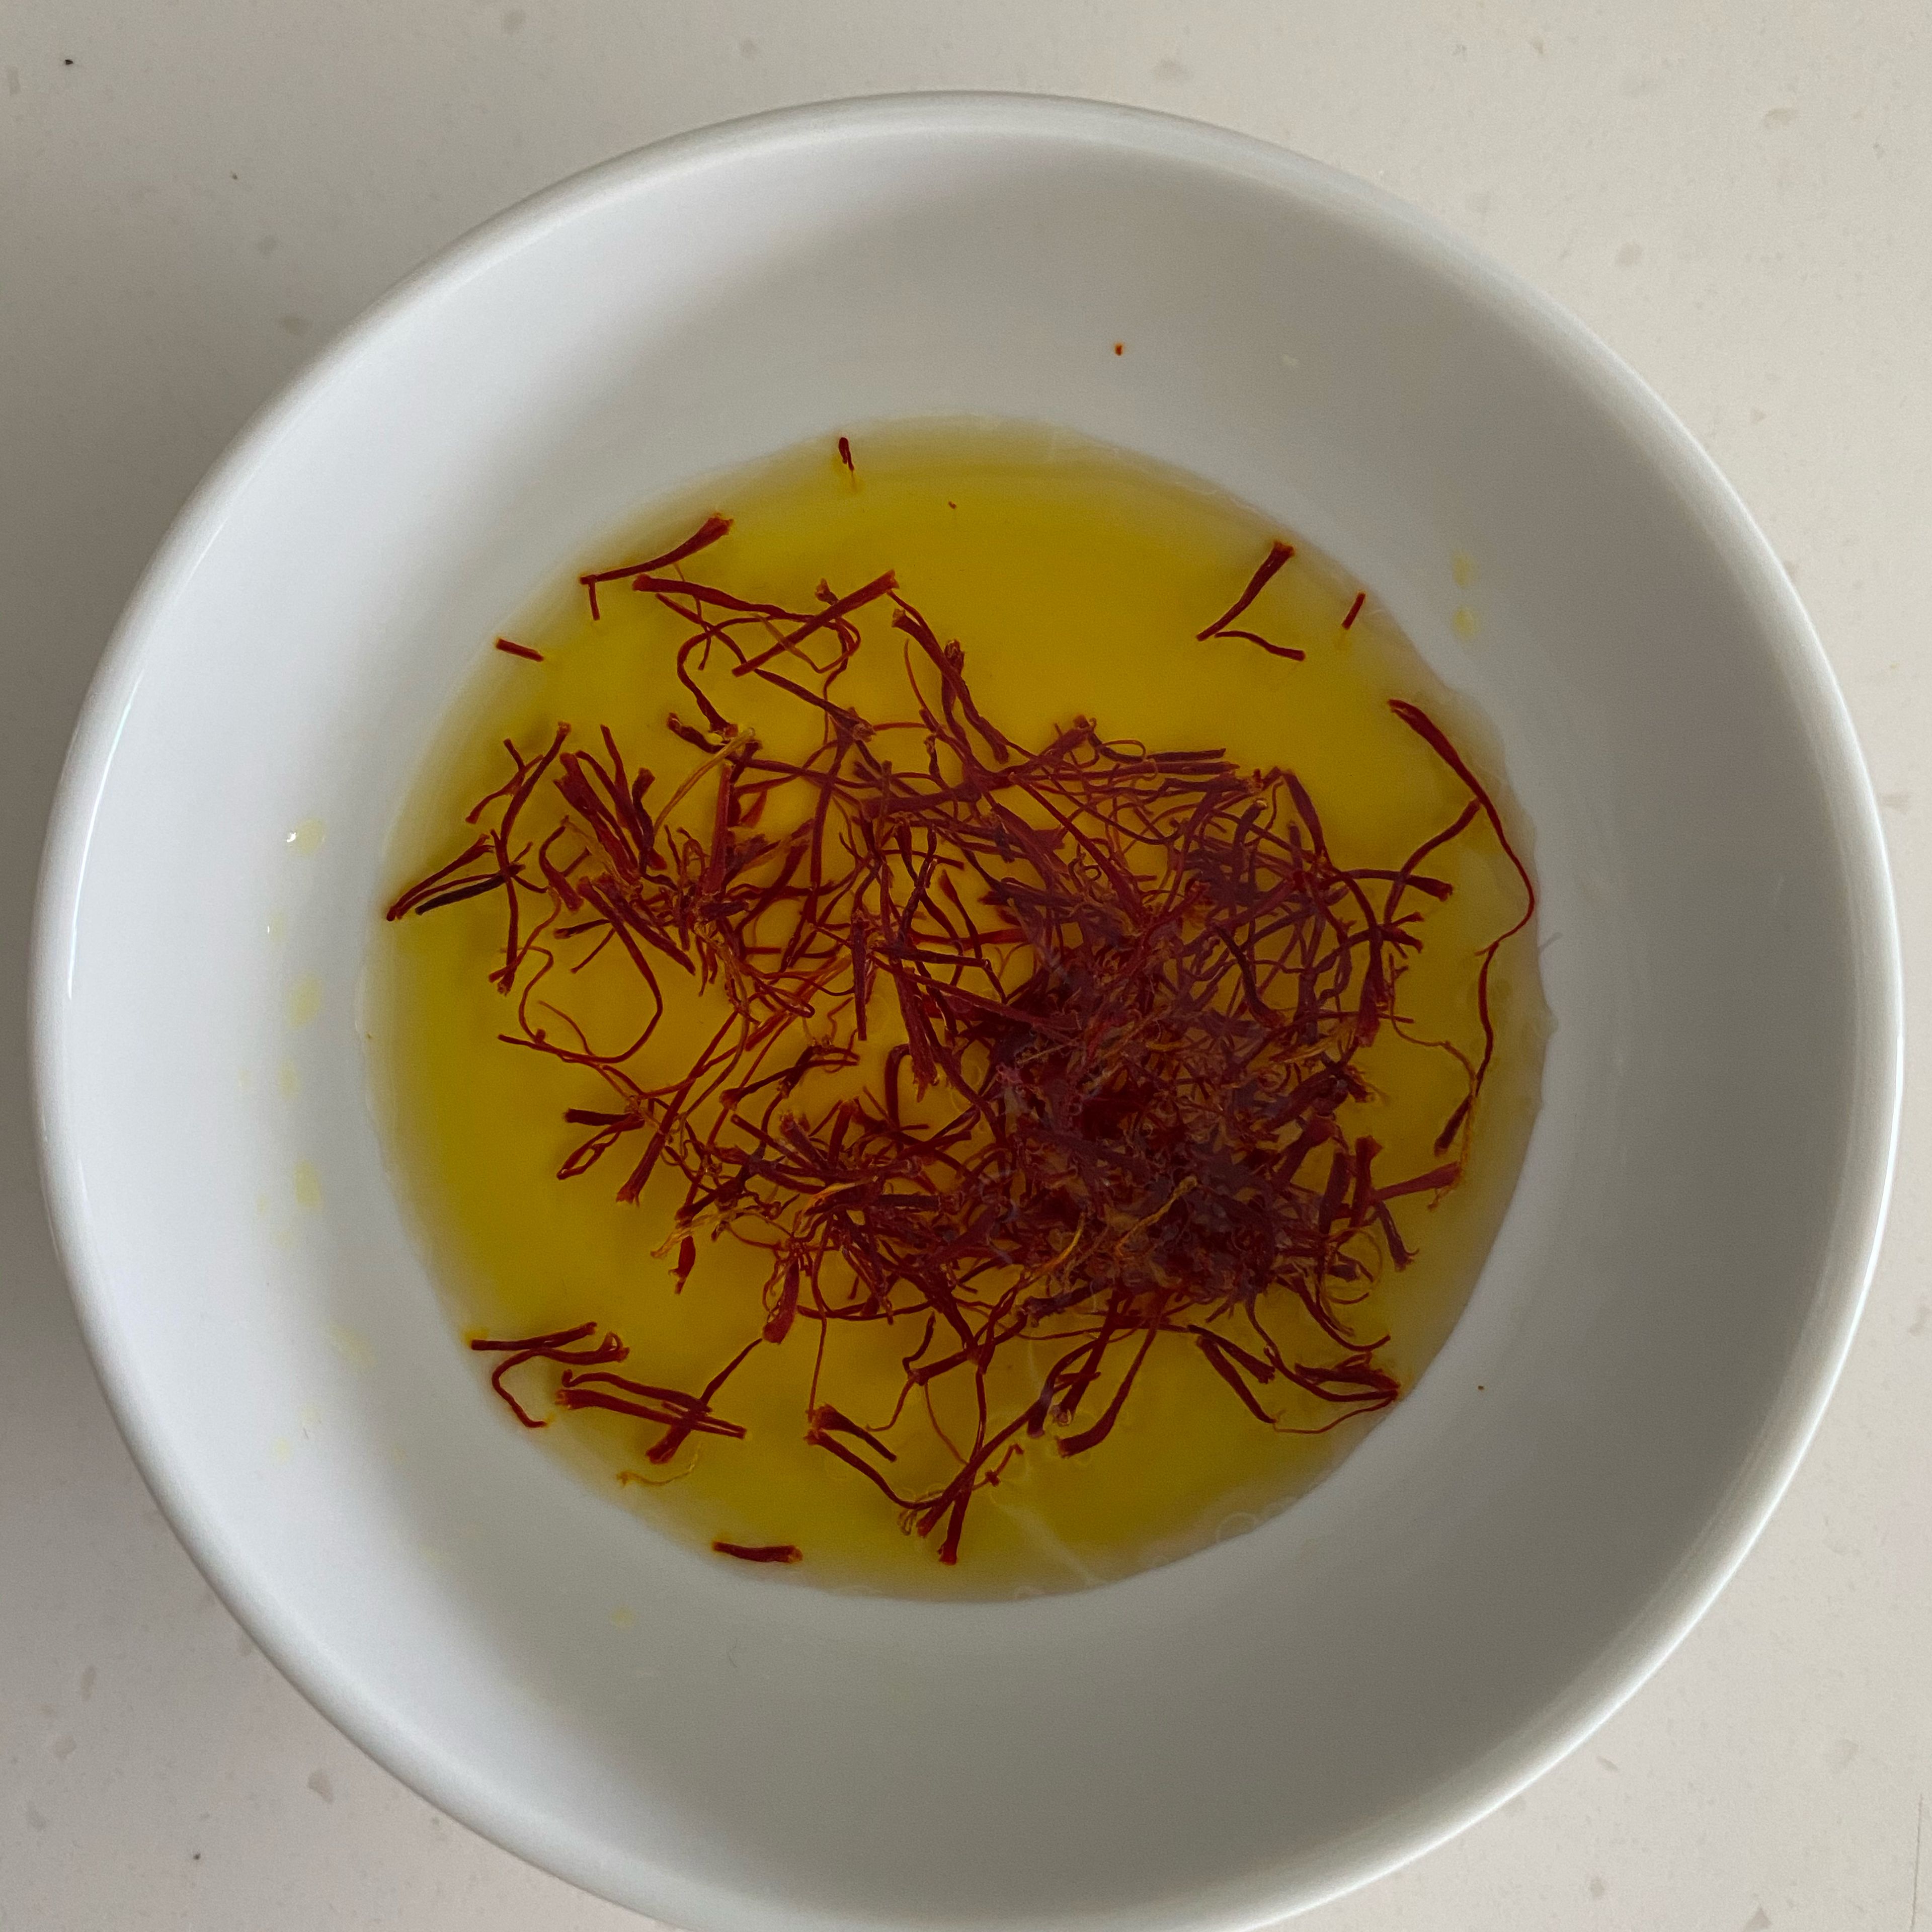 To make the saffron risotto, first put the pistils of saffron in a small bowl, pour enough water (2-3 tablespoons) over them to completely cover the pistils, stir and leave to infuse a couple of hours, in this way the pistils will release all their colour.